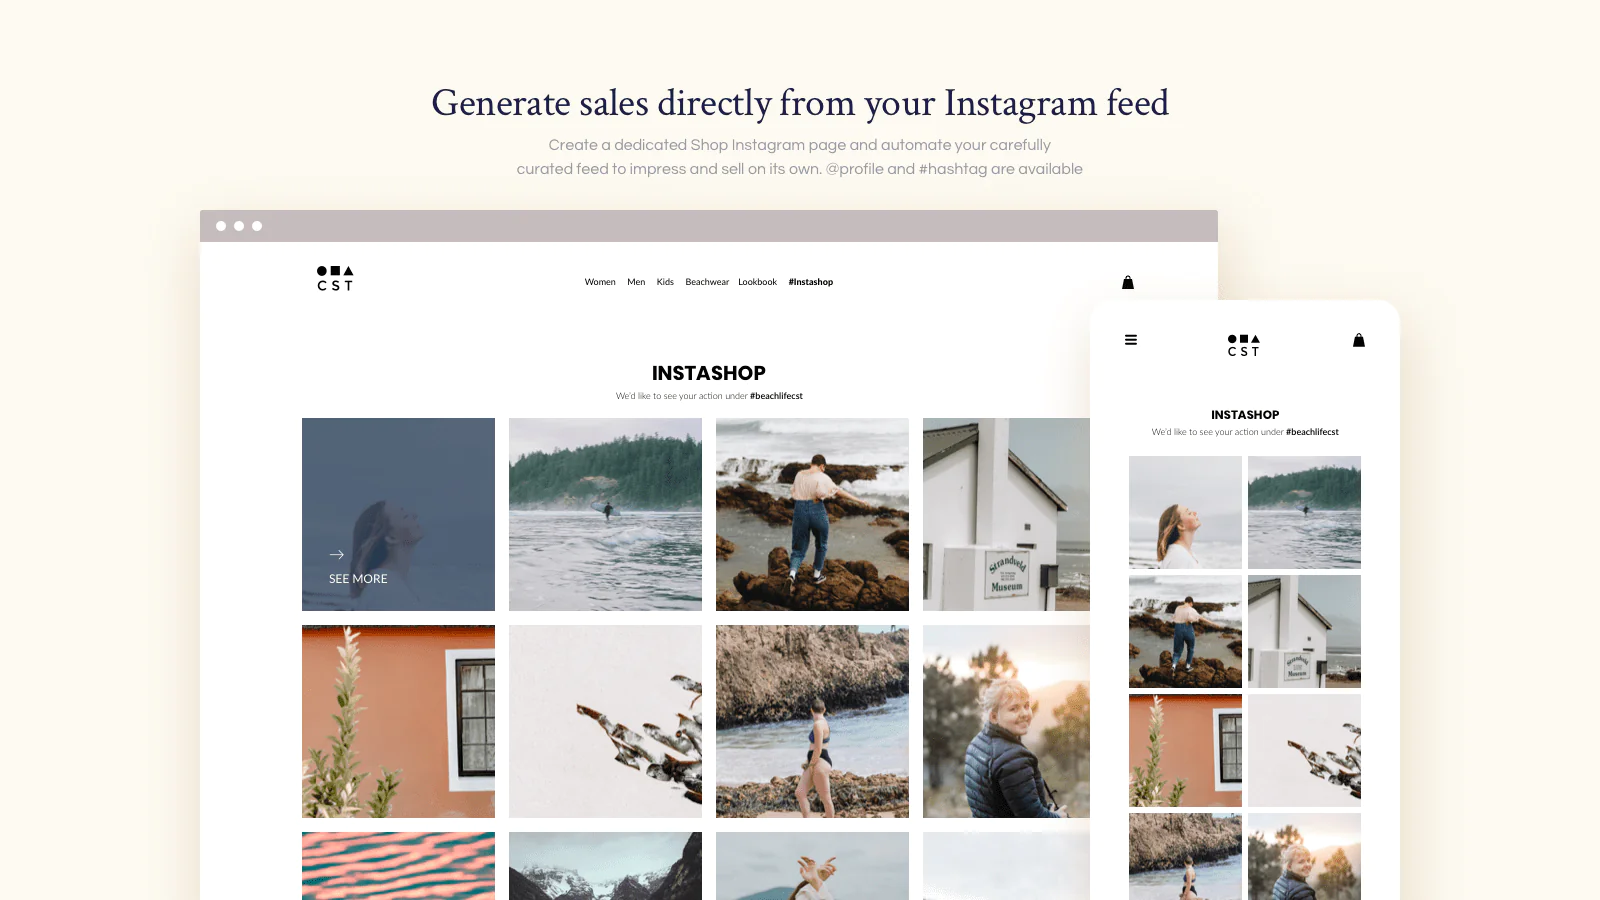 covet-instagram-feed-and-reviews-generate-sales